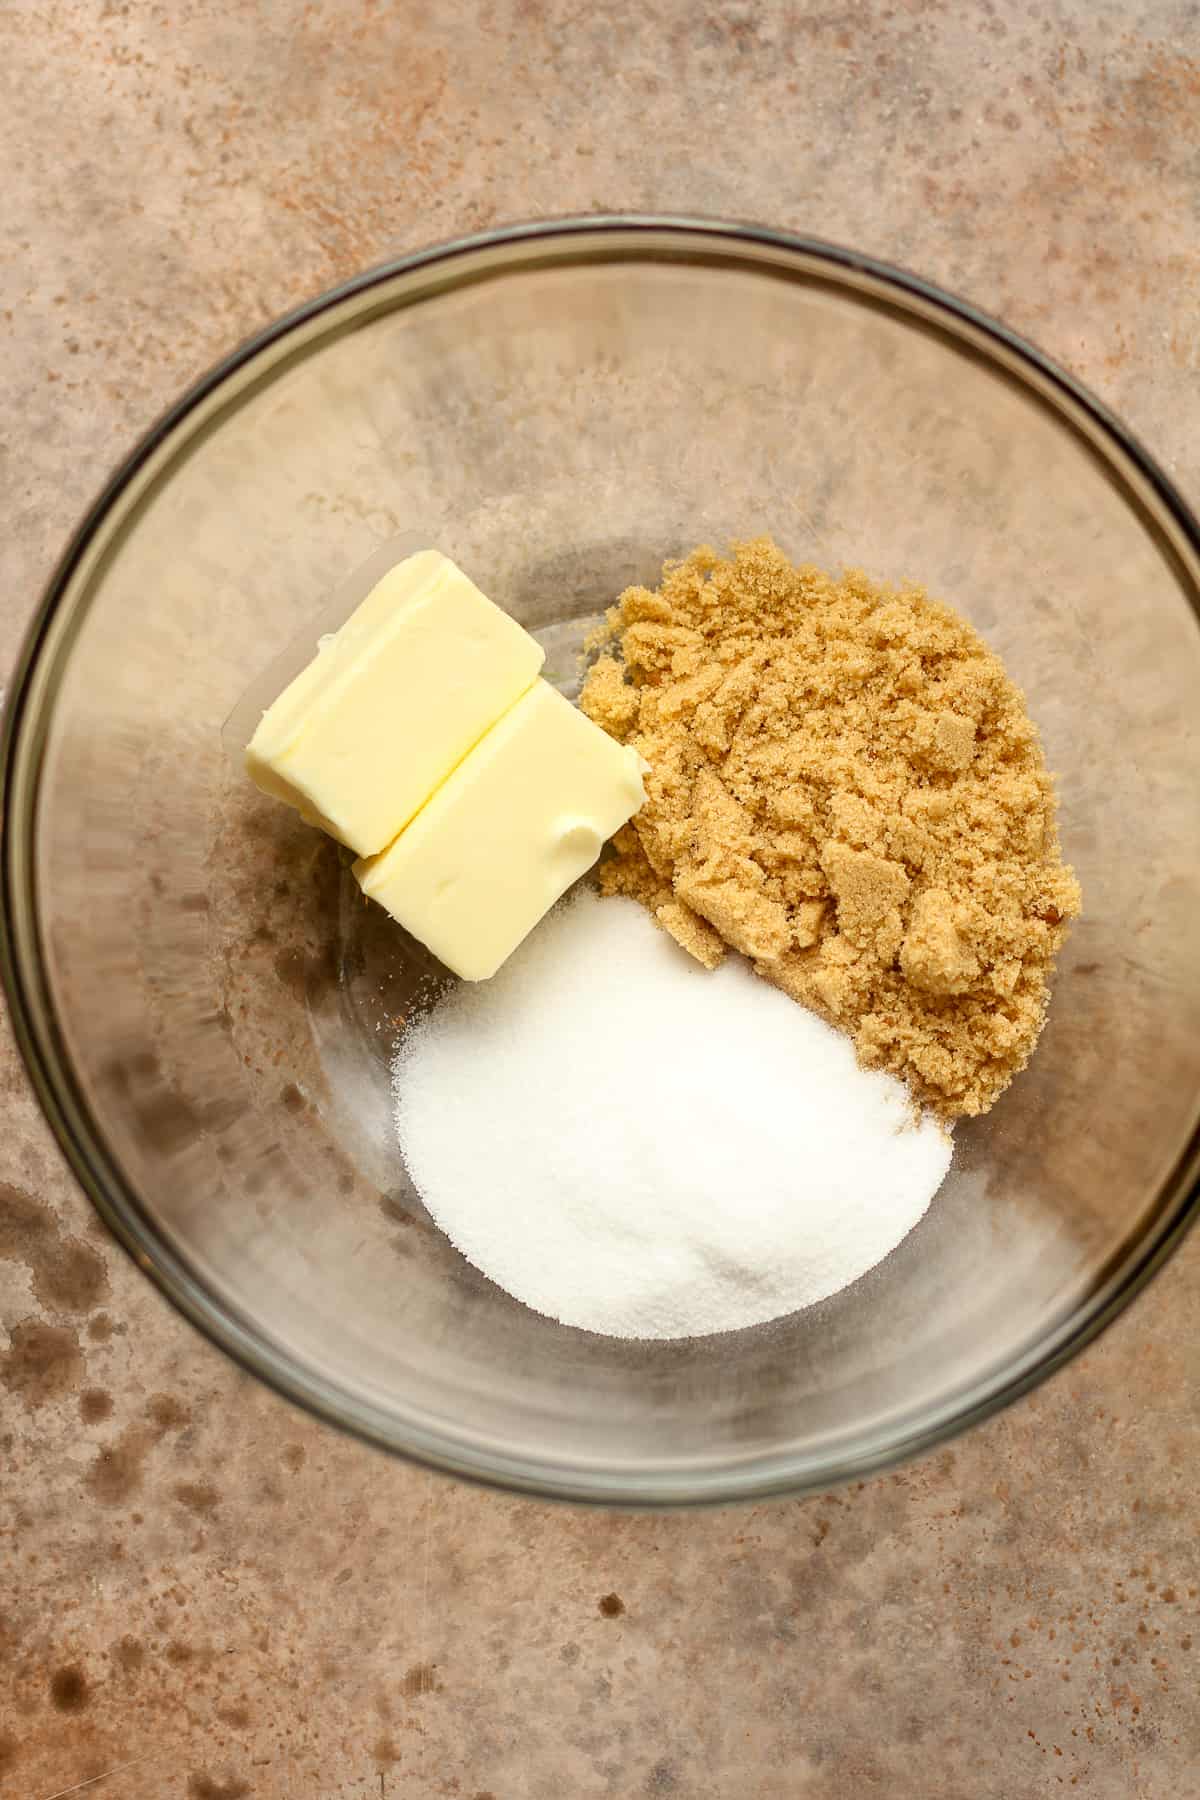 A bowl of the sugar and butter.